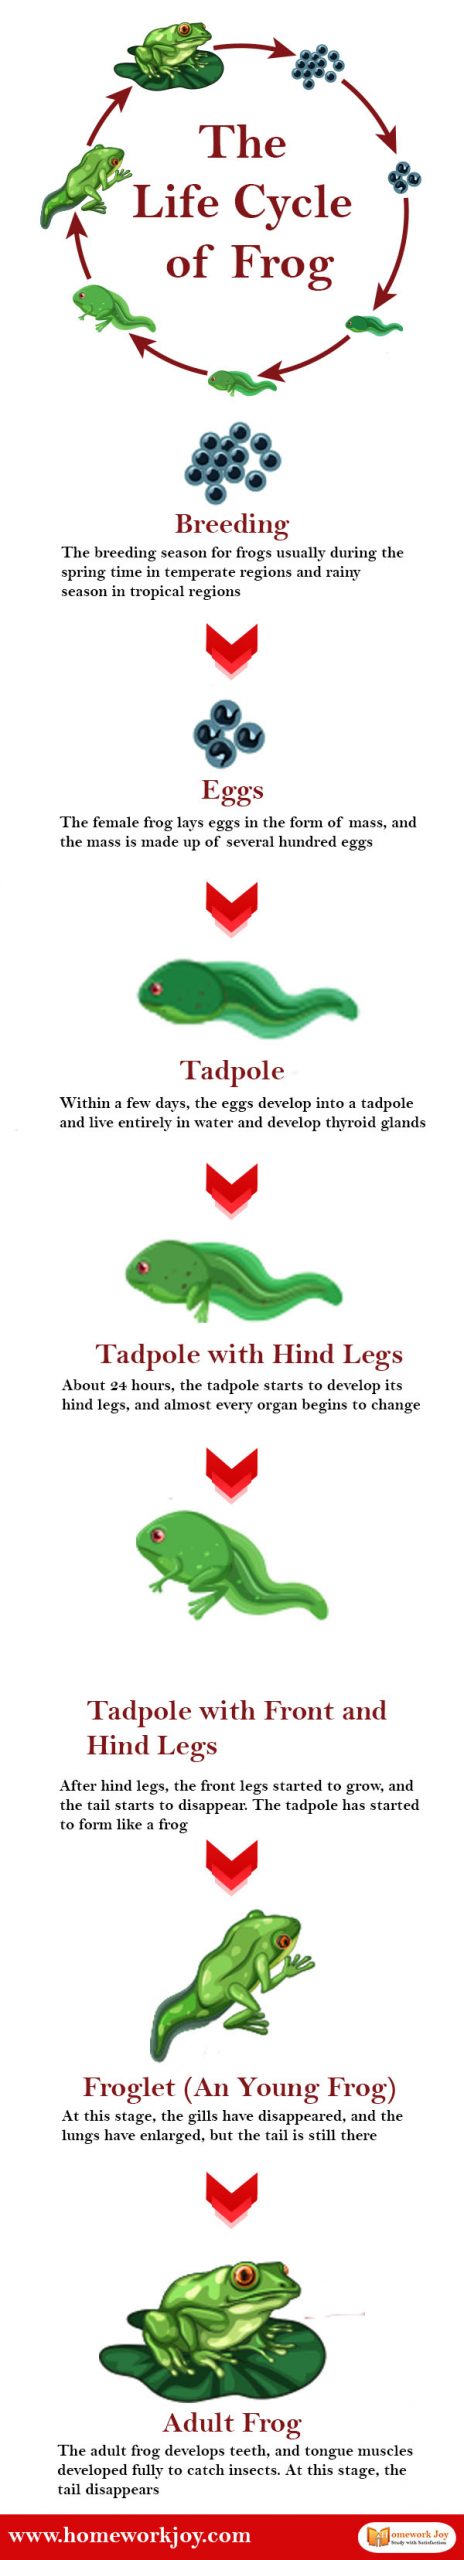 The life cycle of frog